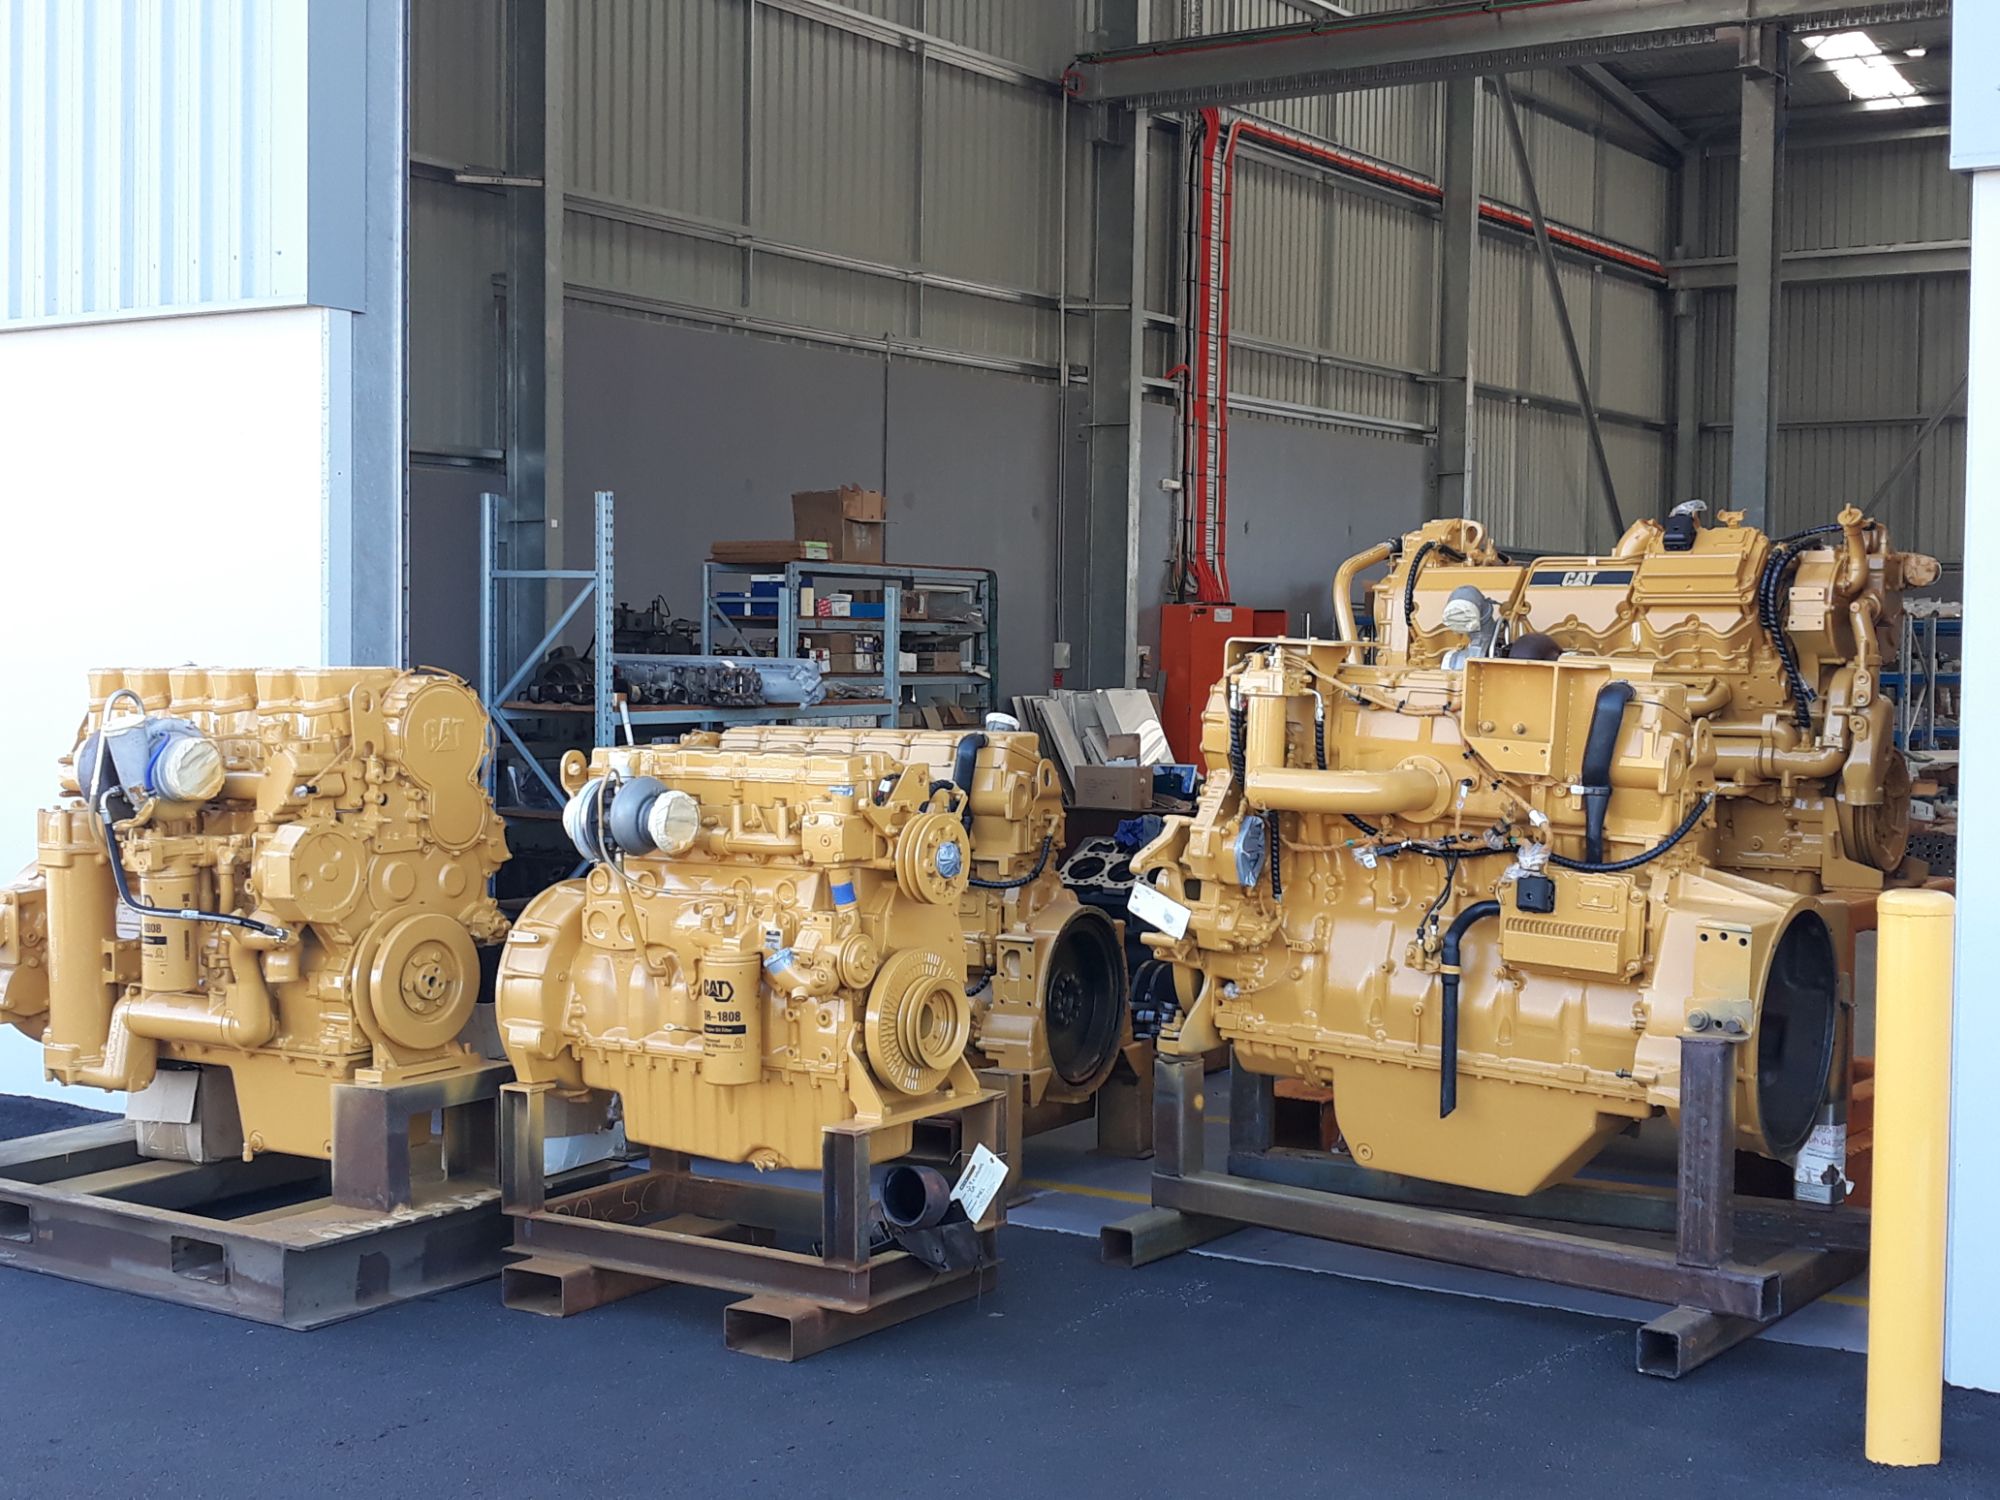 The CATÂ® Engine Experts in Reconditioning and Remanufacturing in Australia